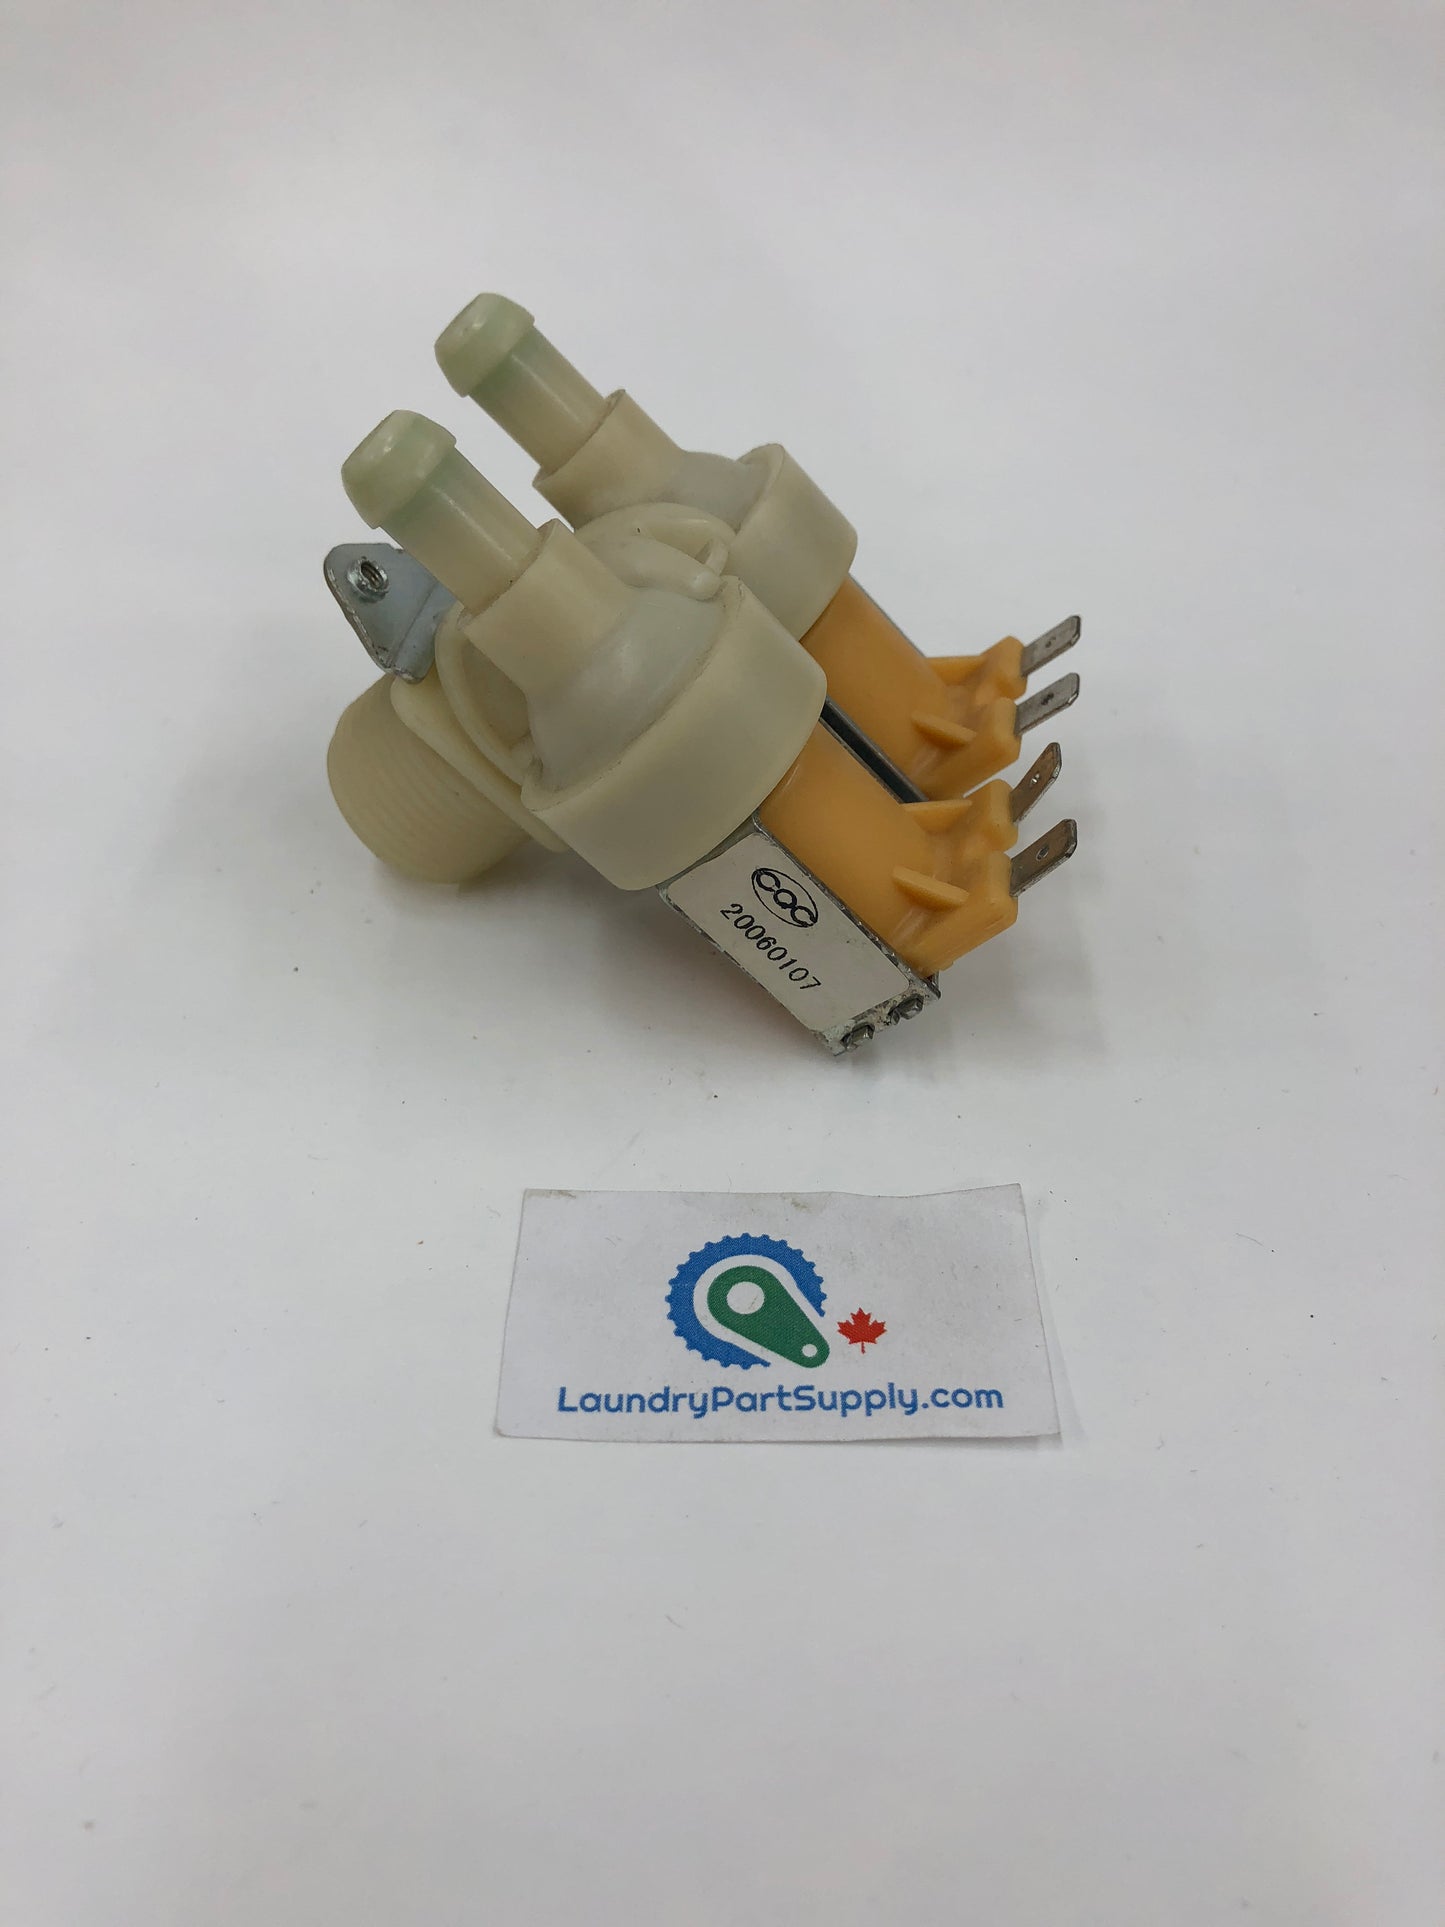 INLET VALVE,3/4",13m 2 OUT